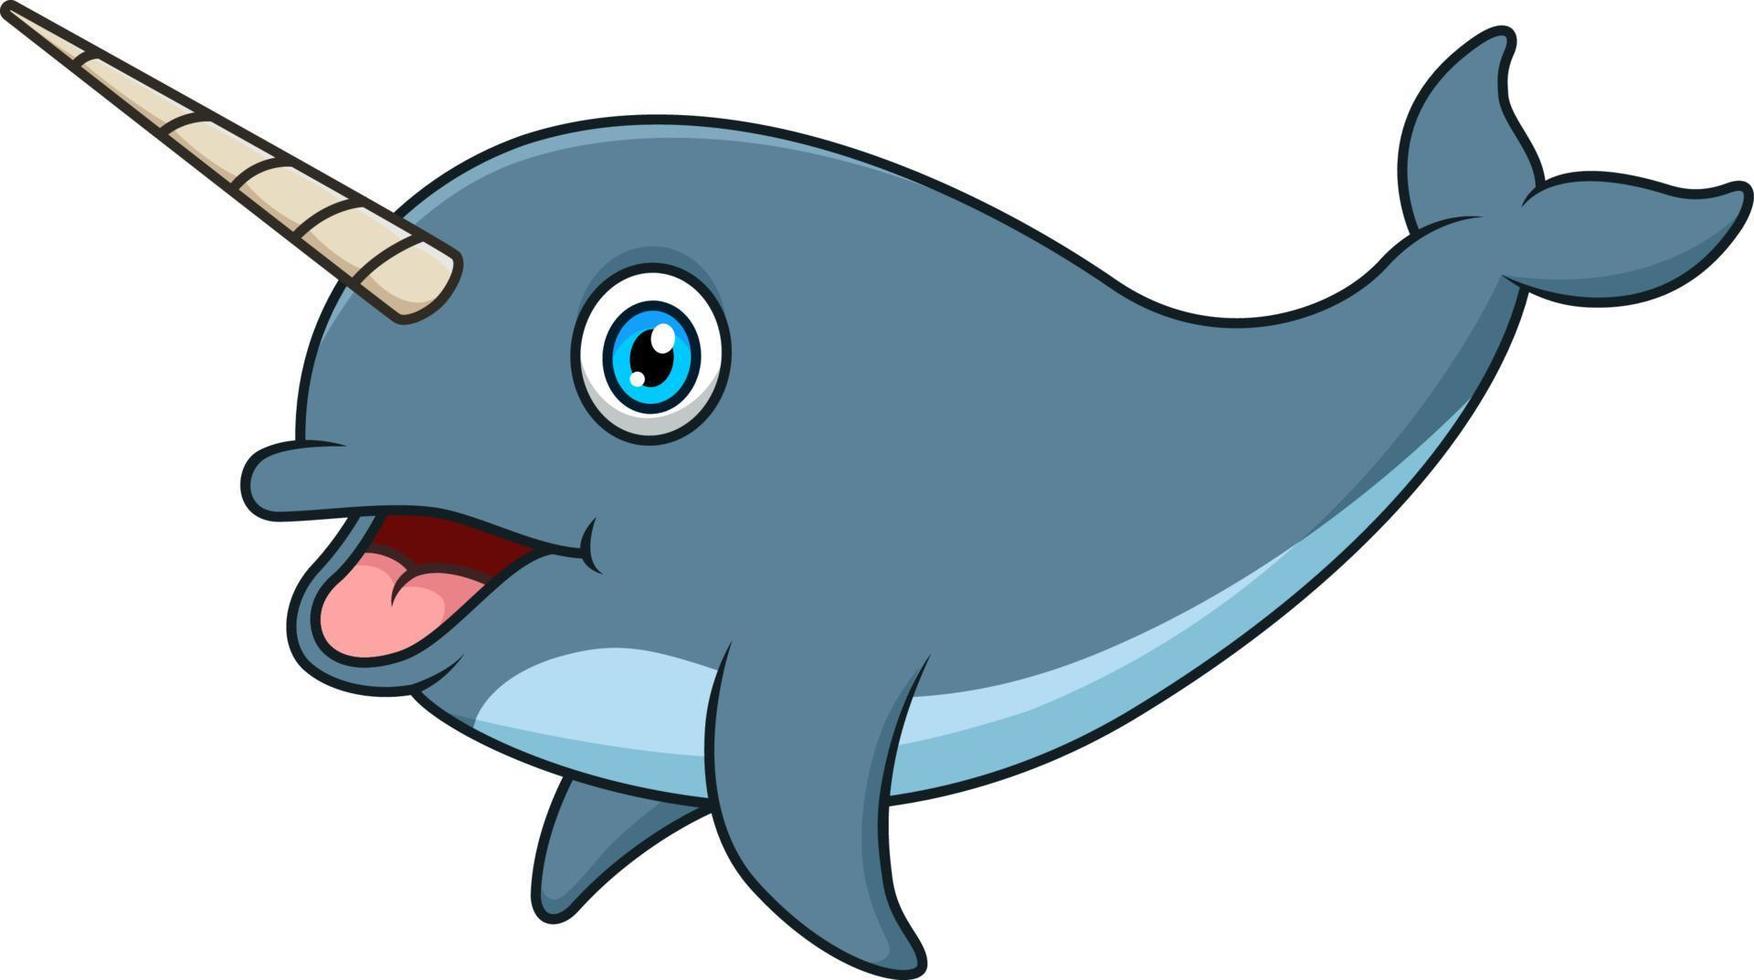 Smiling cute narwhal cartoon vector